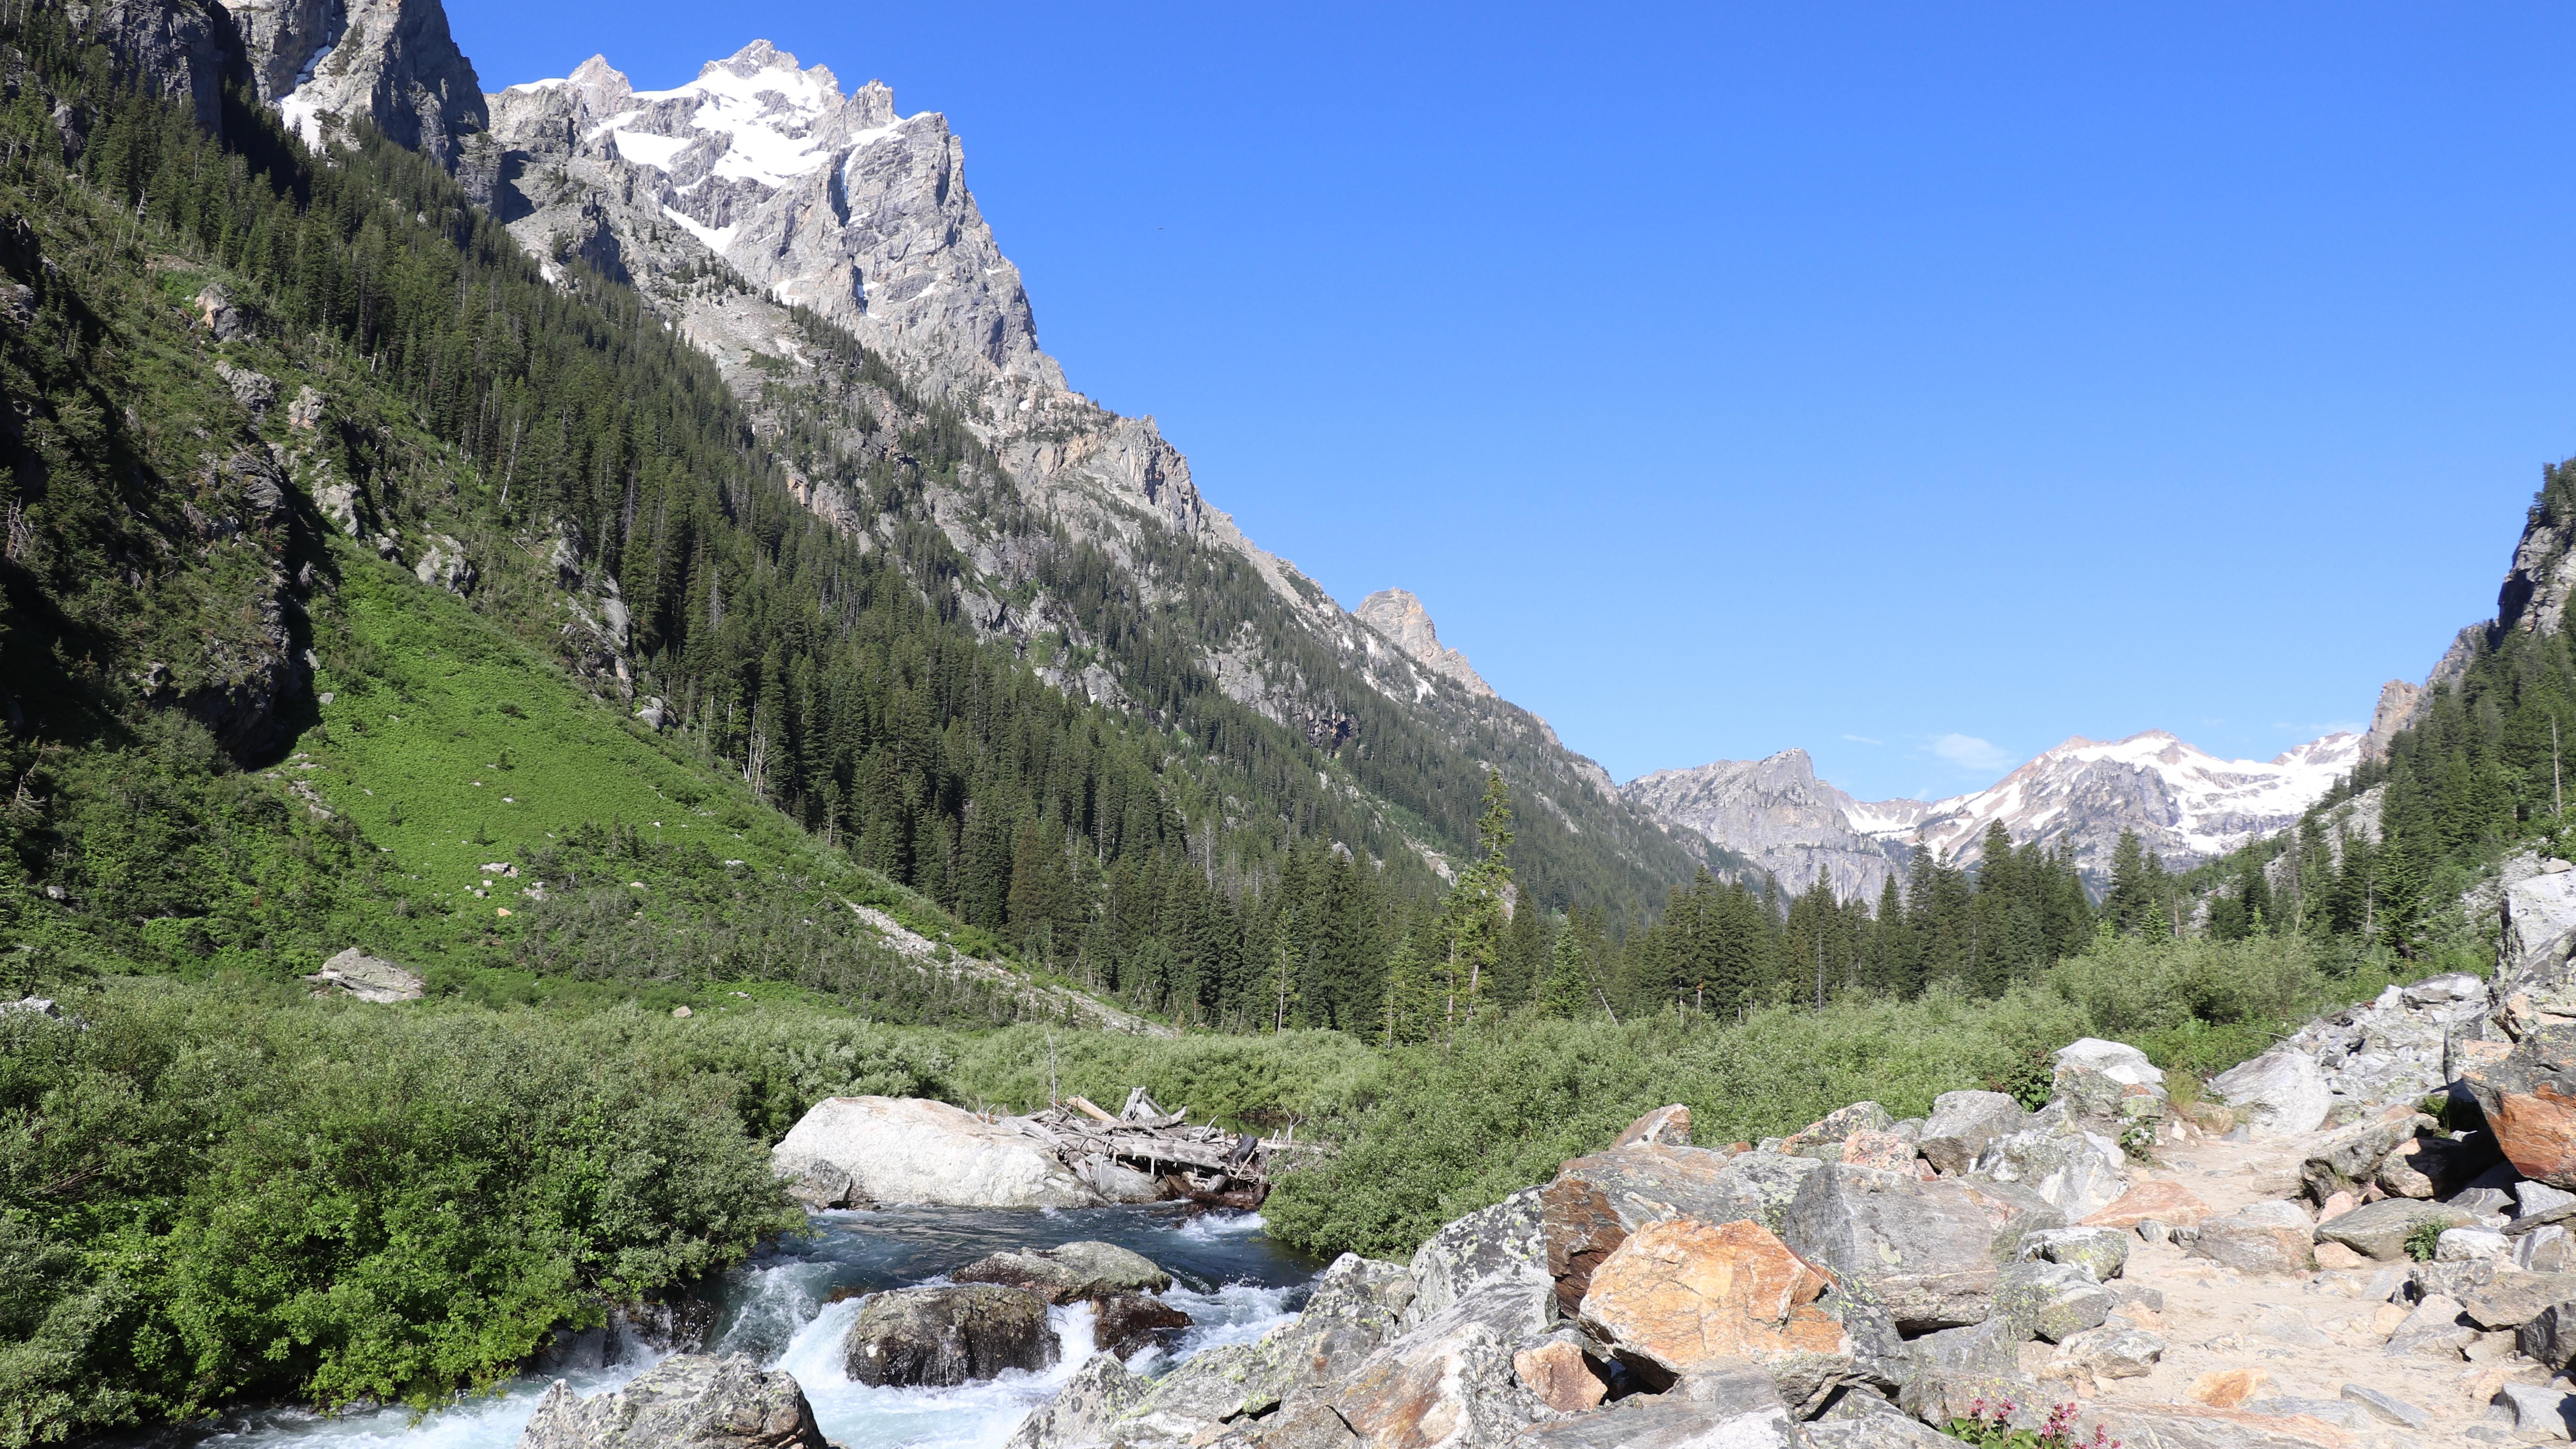 Forks of Cascade Canyon